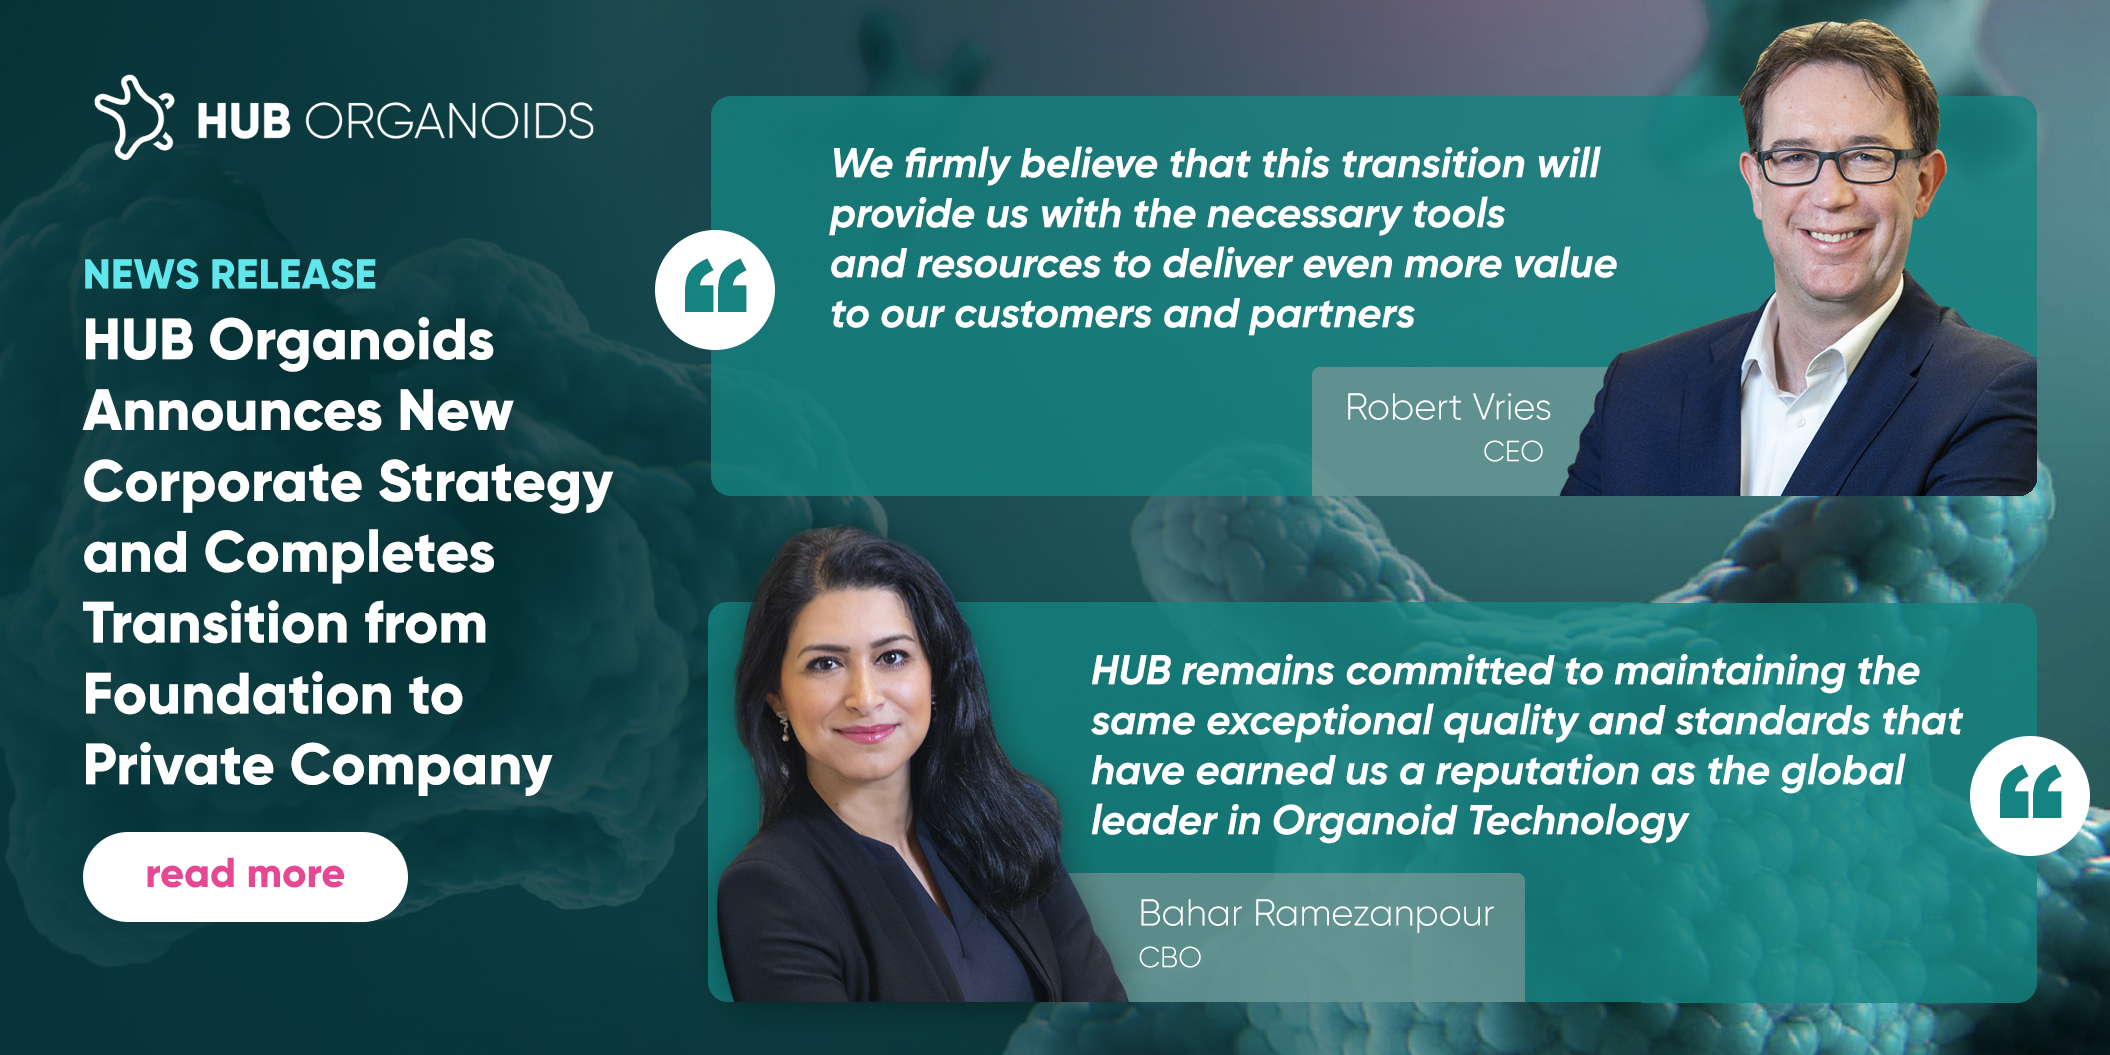 HUB Organoids Announces New Corporate Strategy and Completes Transition from Foundation to Private Company